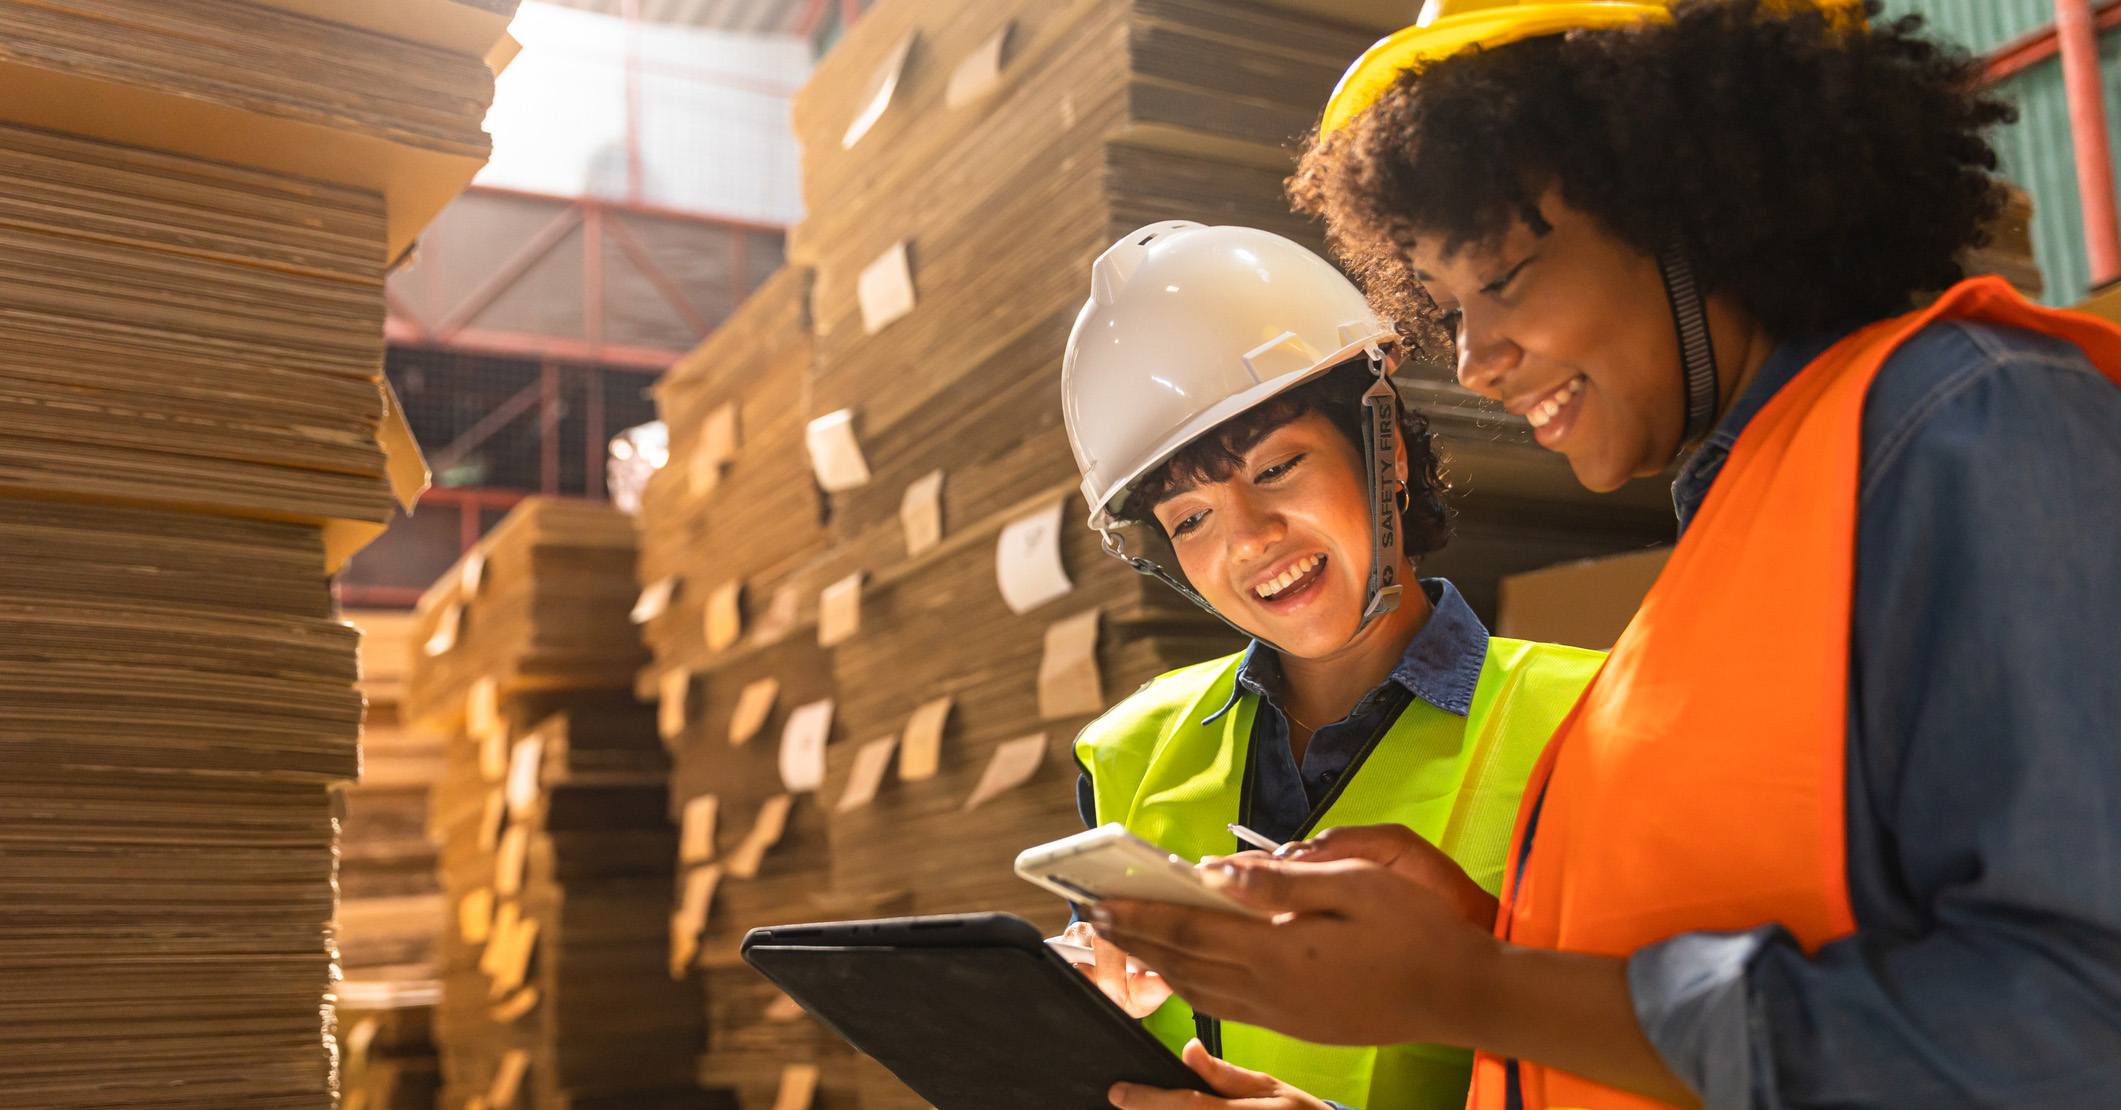 Two warehouse workers discussing over a tablet and cell phone